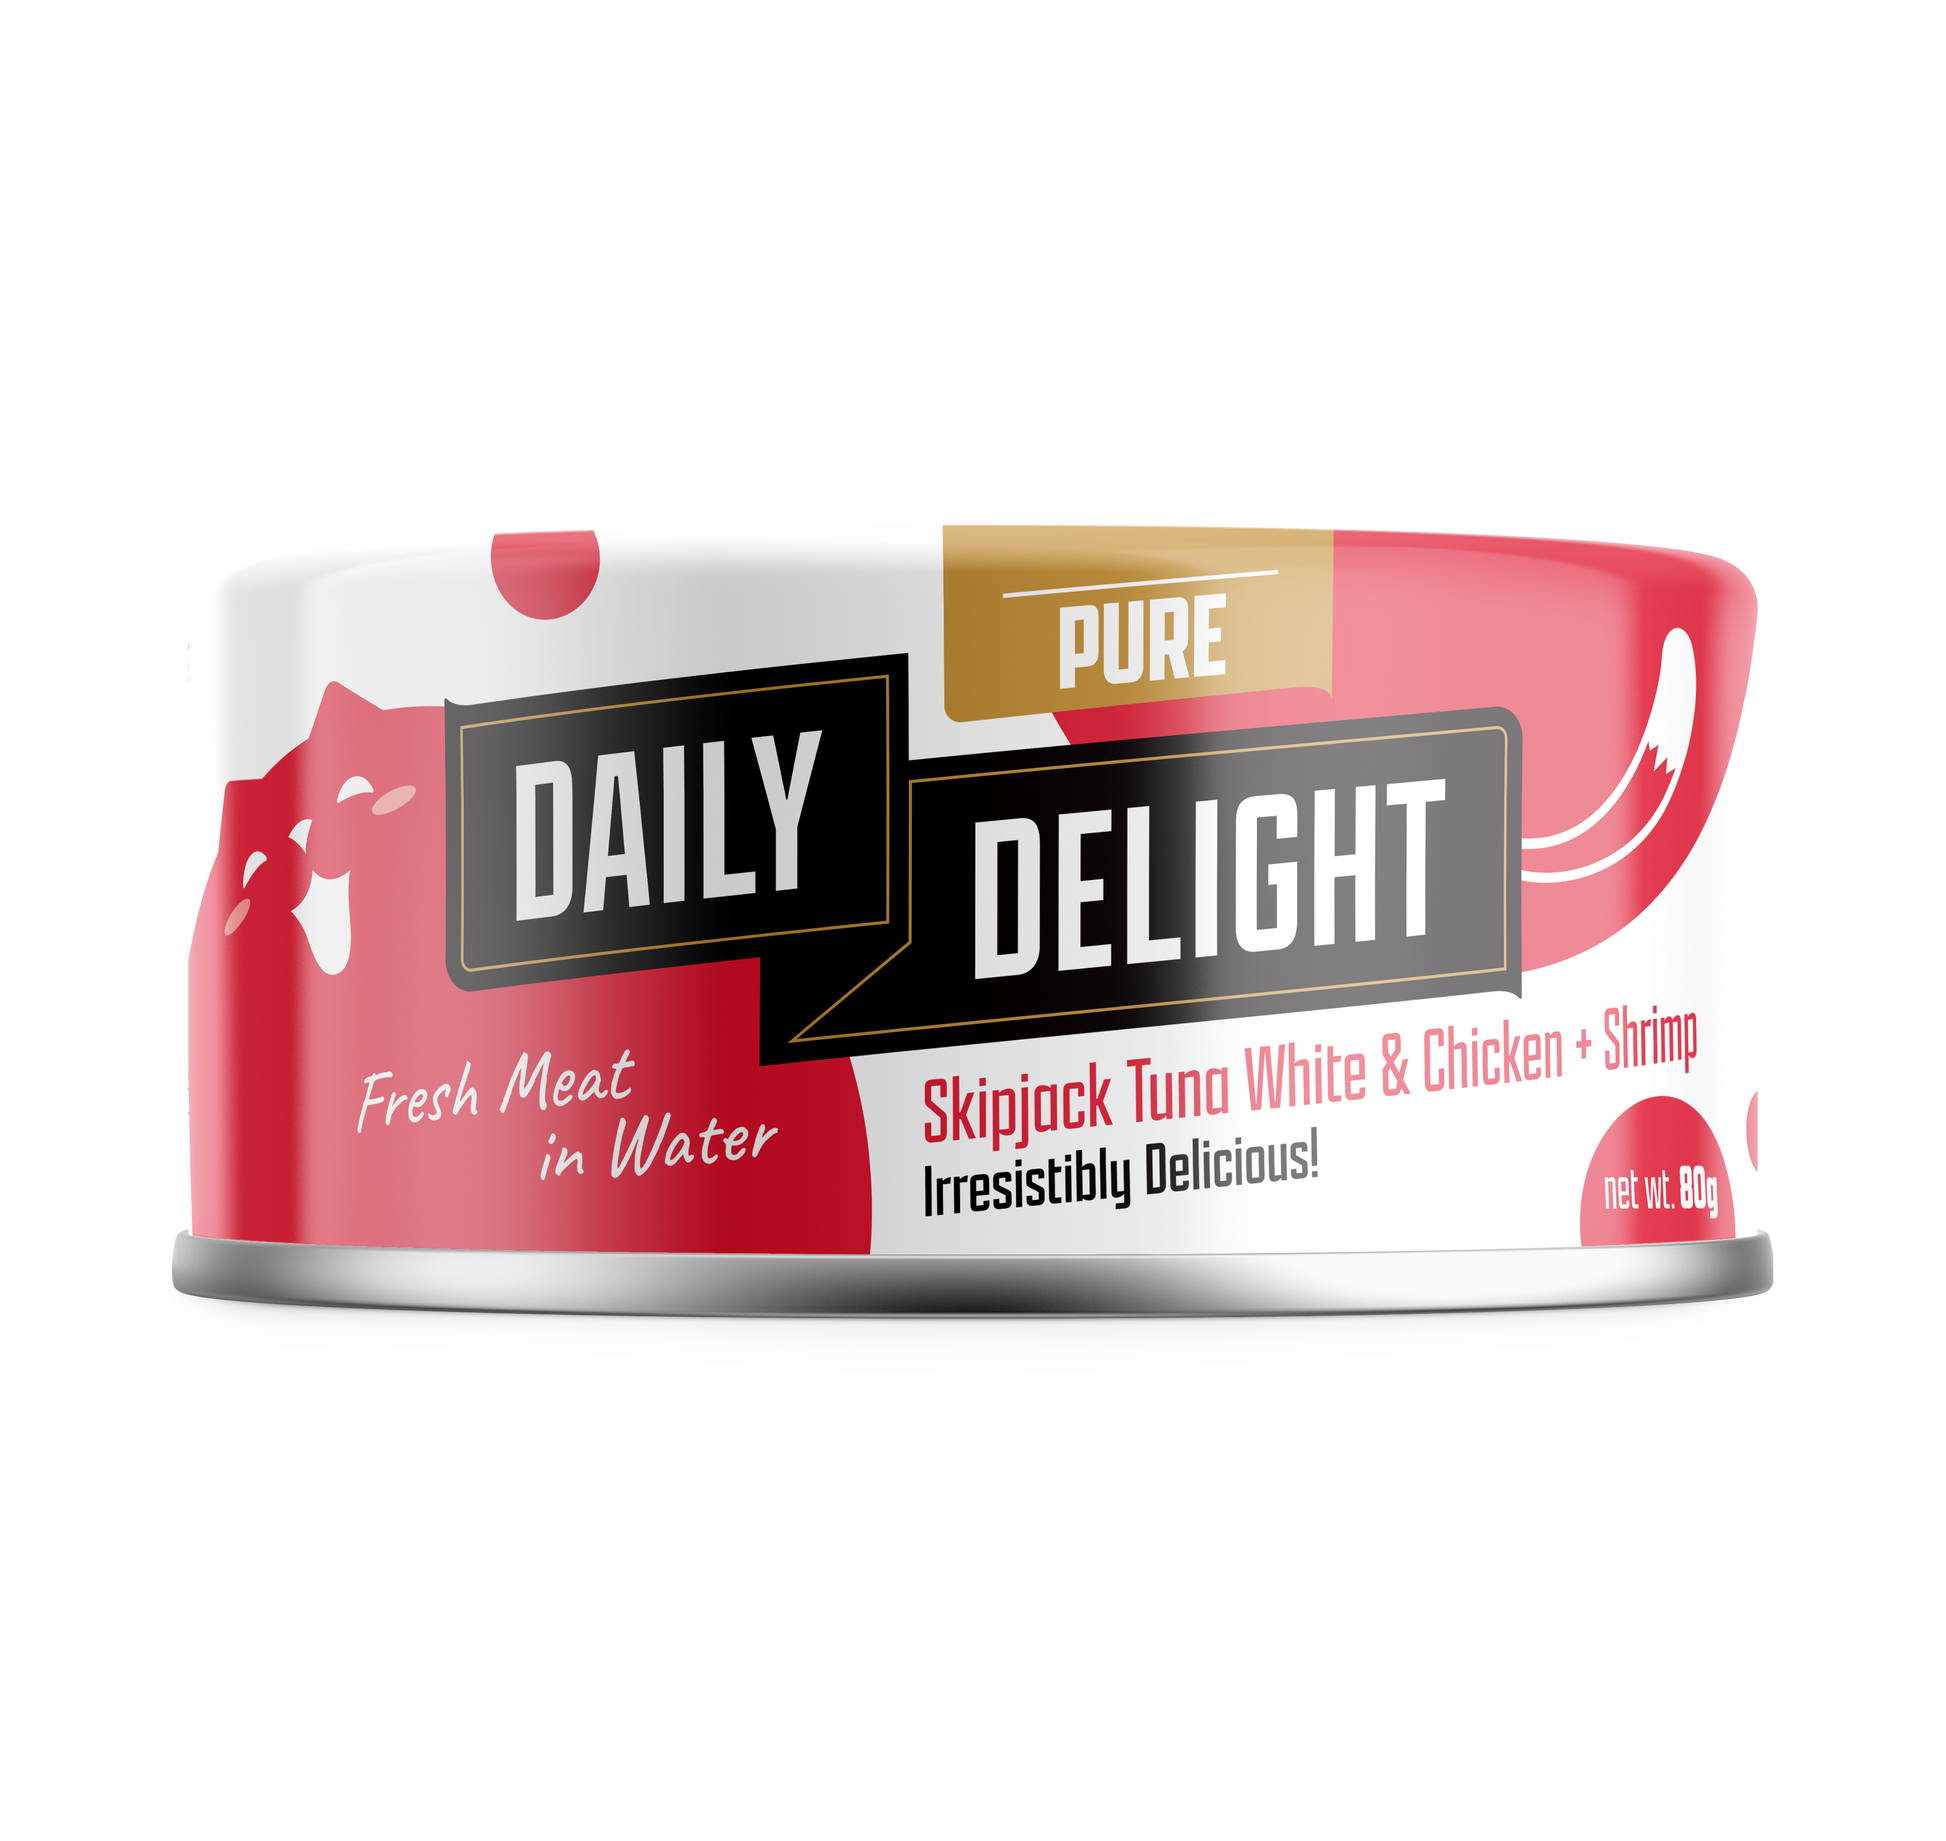 Daily Delight Pure Skipjack Tuna White & Chicken with Shrimp 80g Carton (24 Cans)-Daily Delight-Catsmart-express